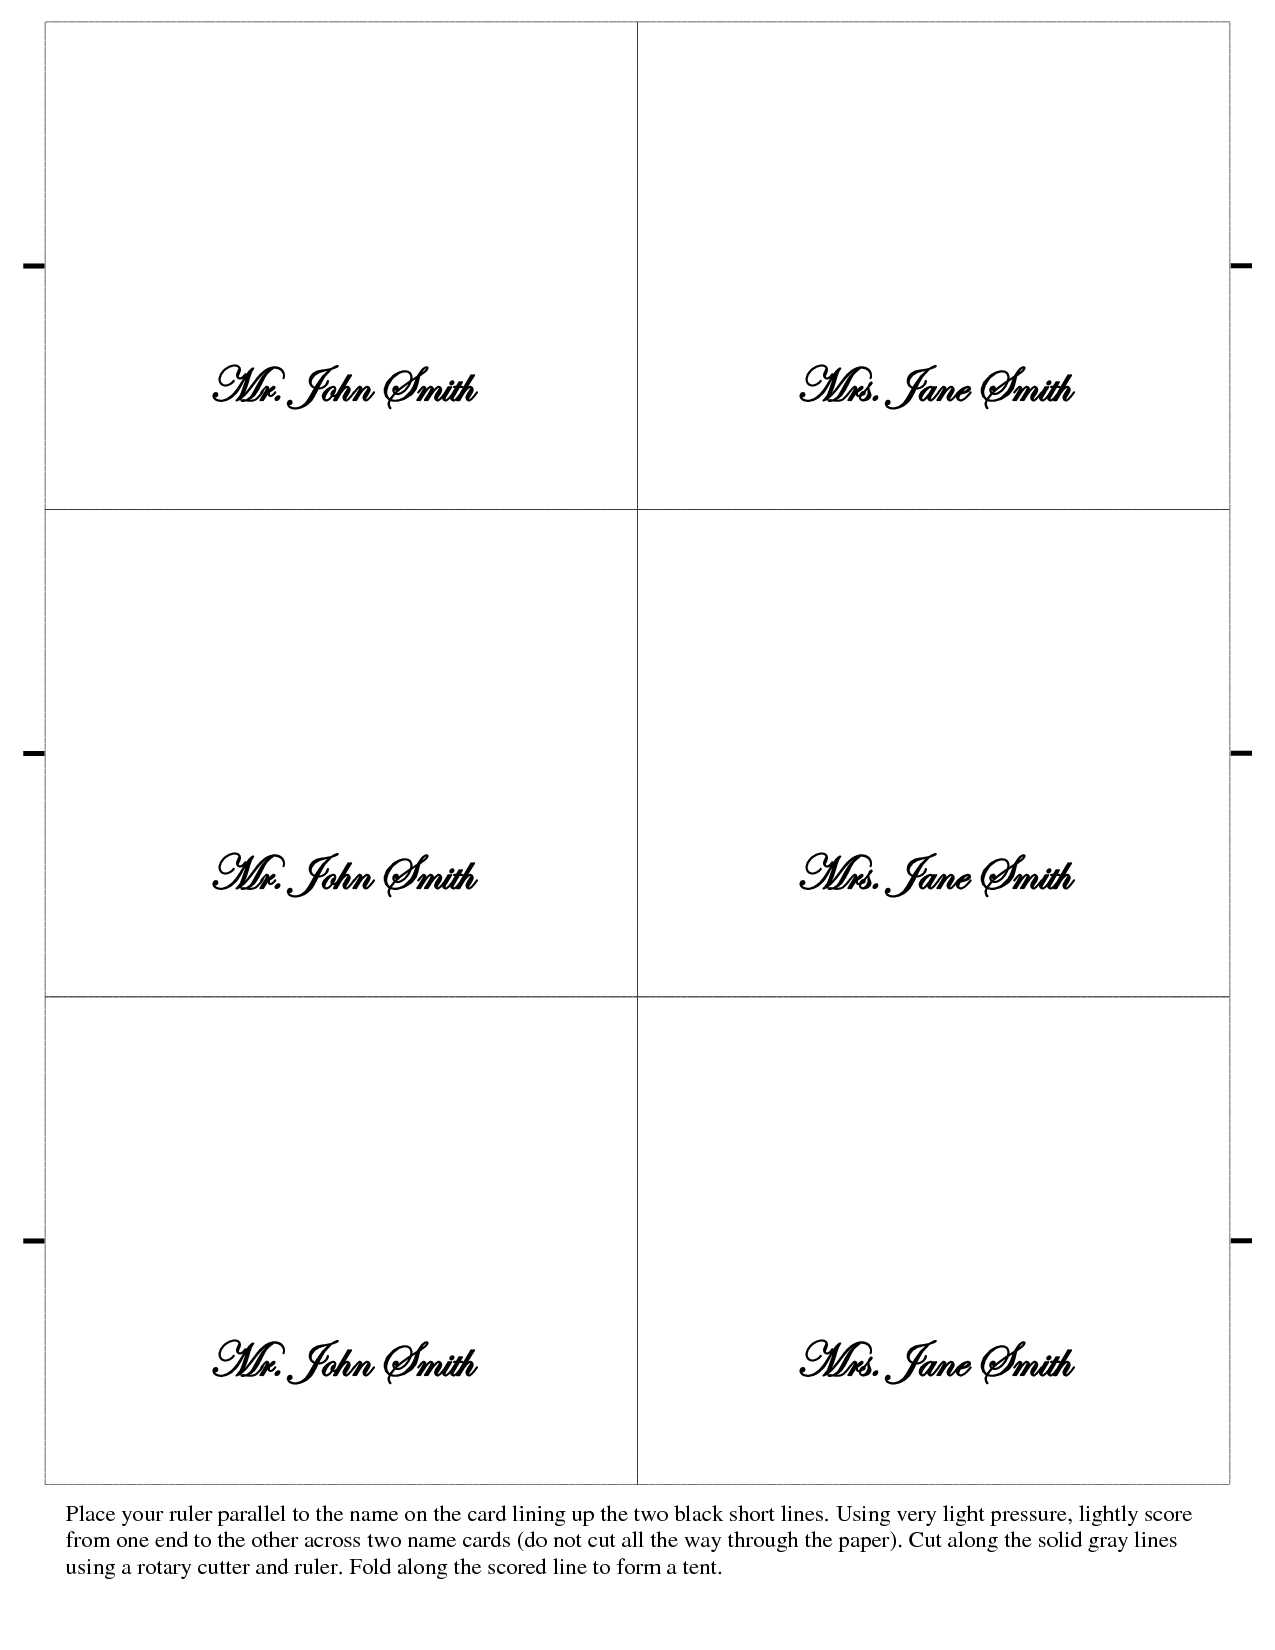 Free Place Card Templates 6 Per Page - Atlantaauctionco Regarding Free Place Card Templates 6 Per Page